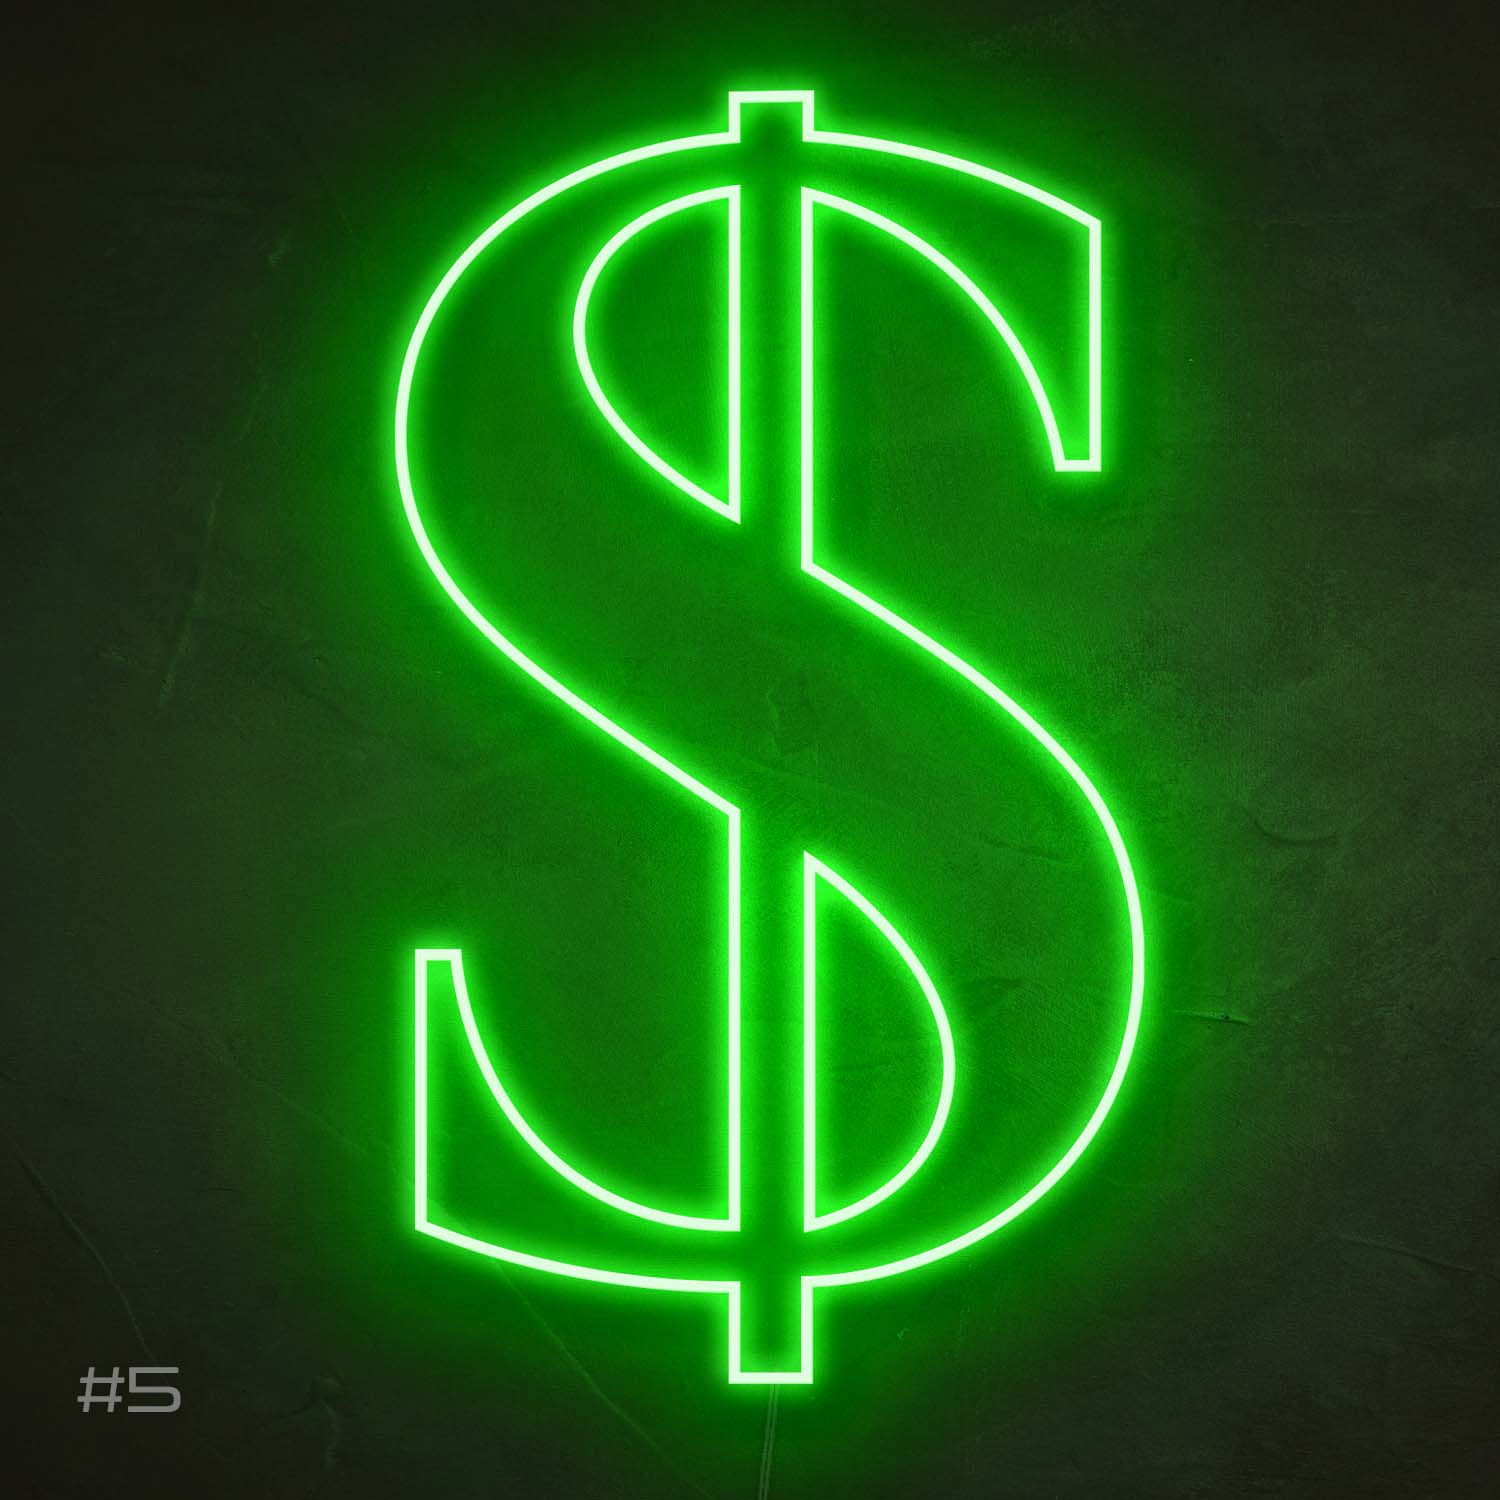 Dollar Neon Sign glow up green